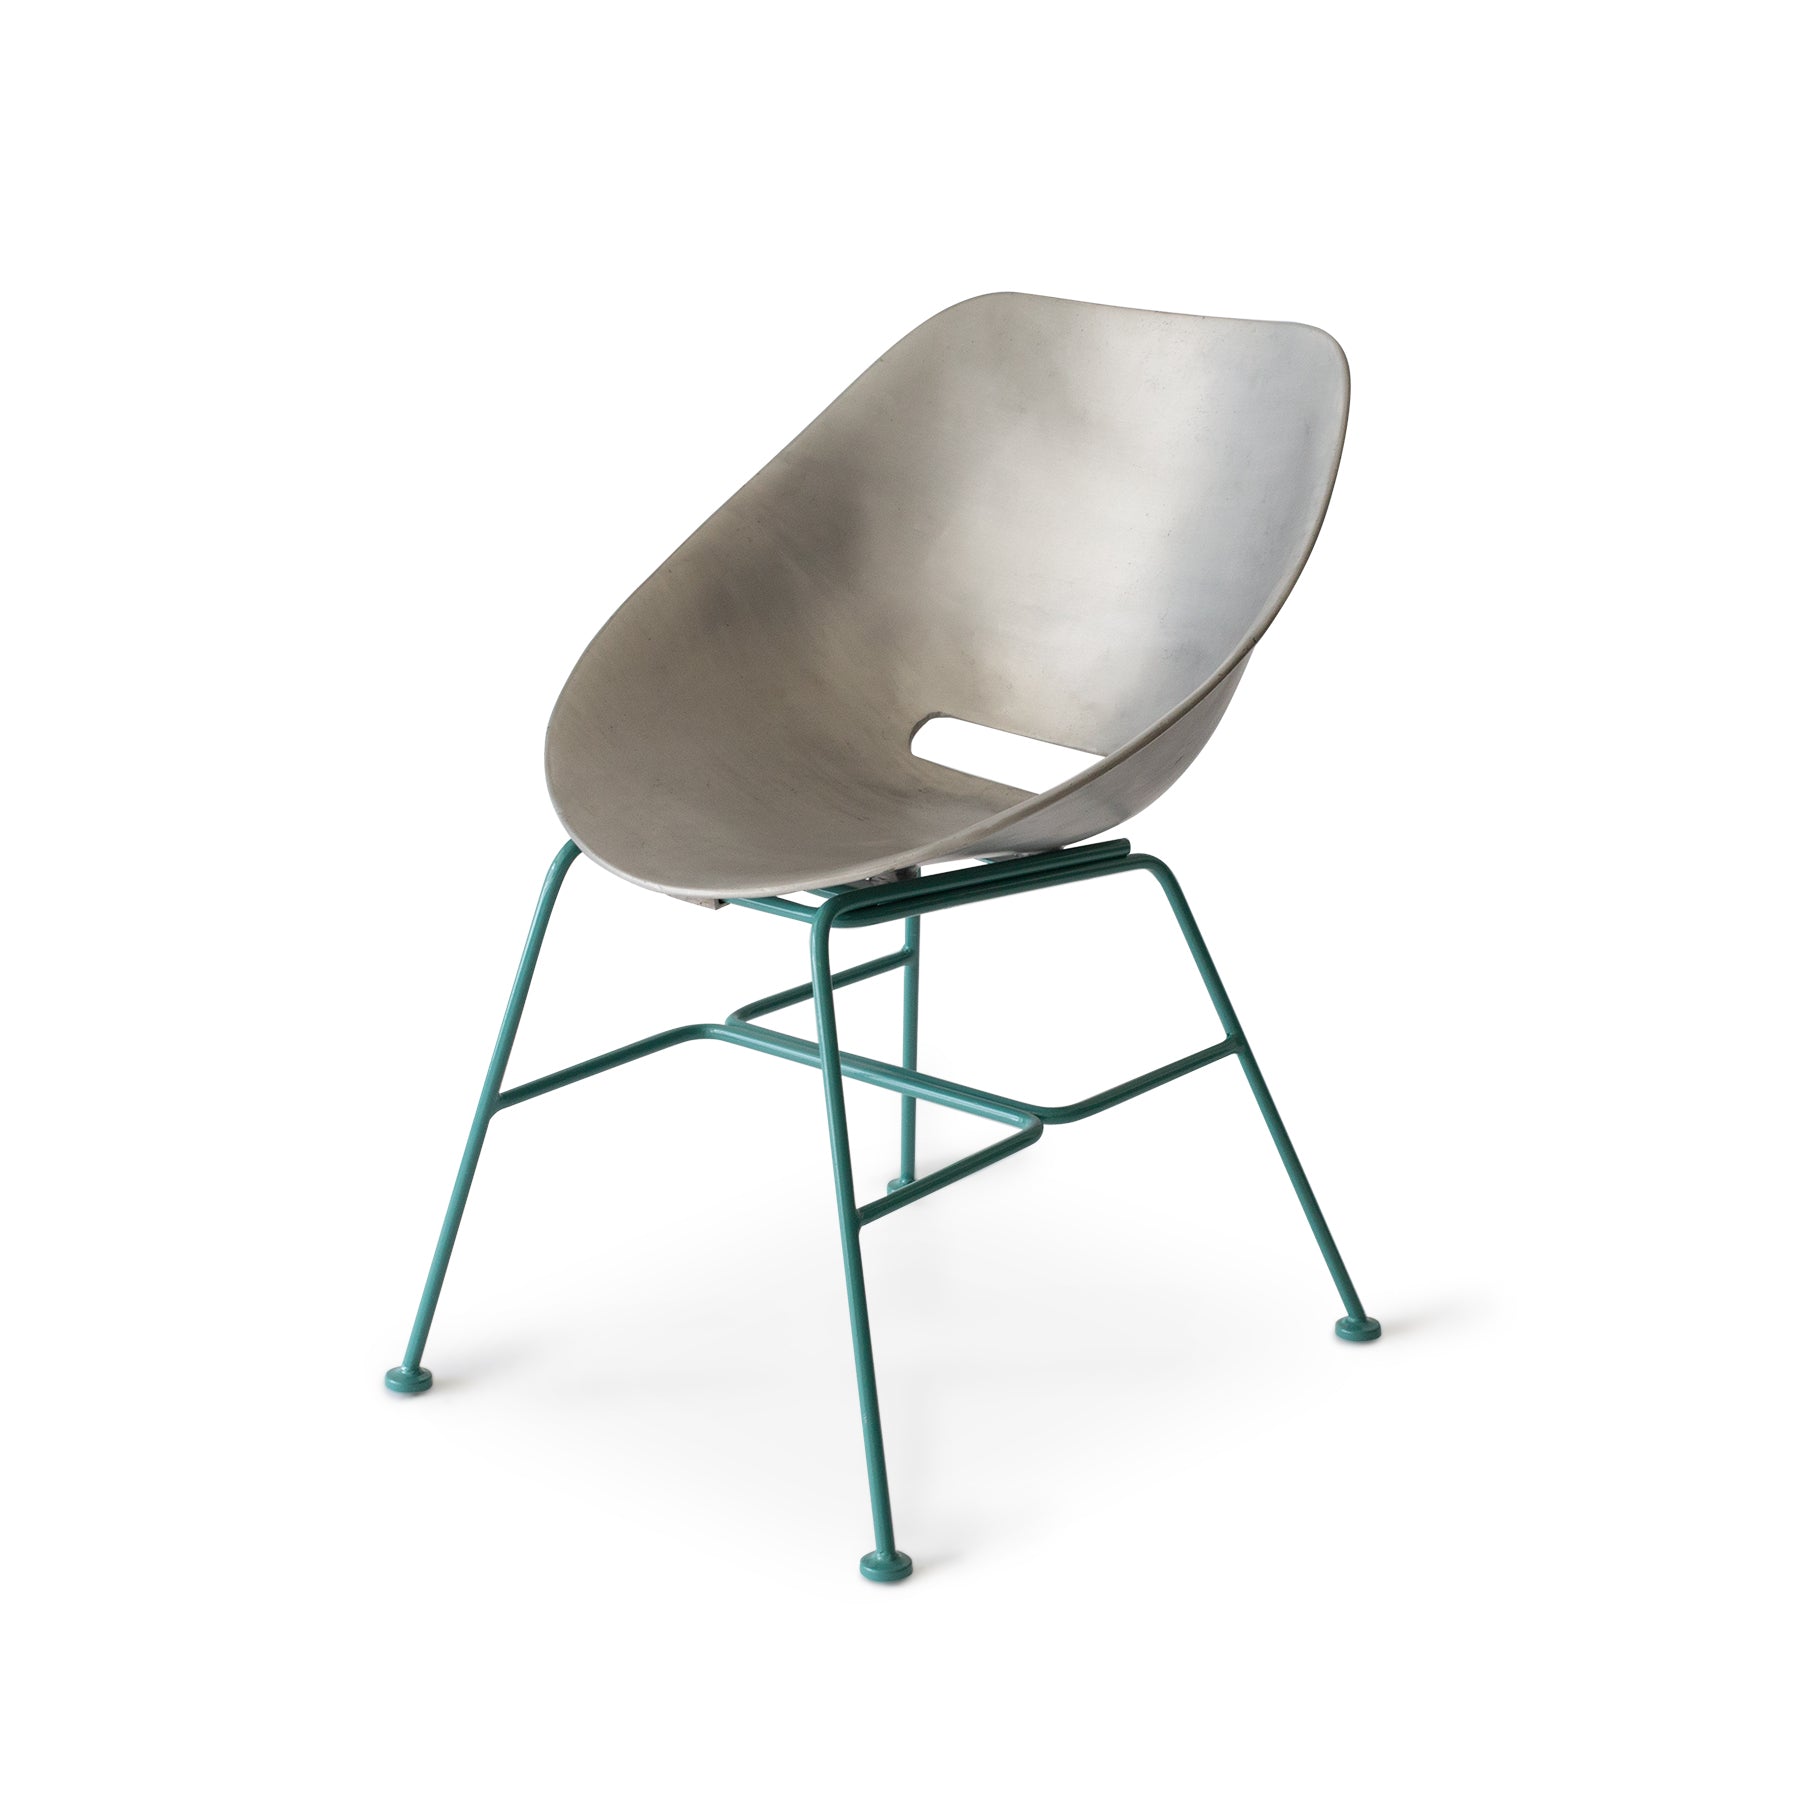 Aluminum Shell Chair with Turquoise Base Zoom Image 1